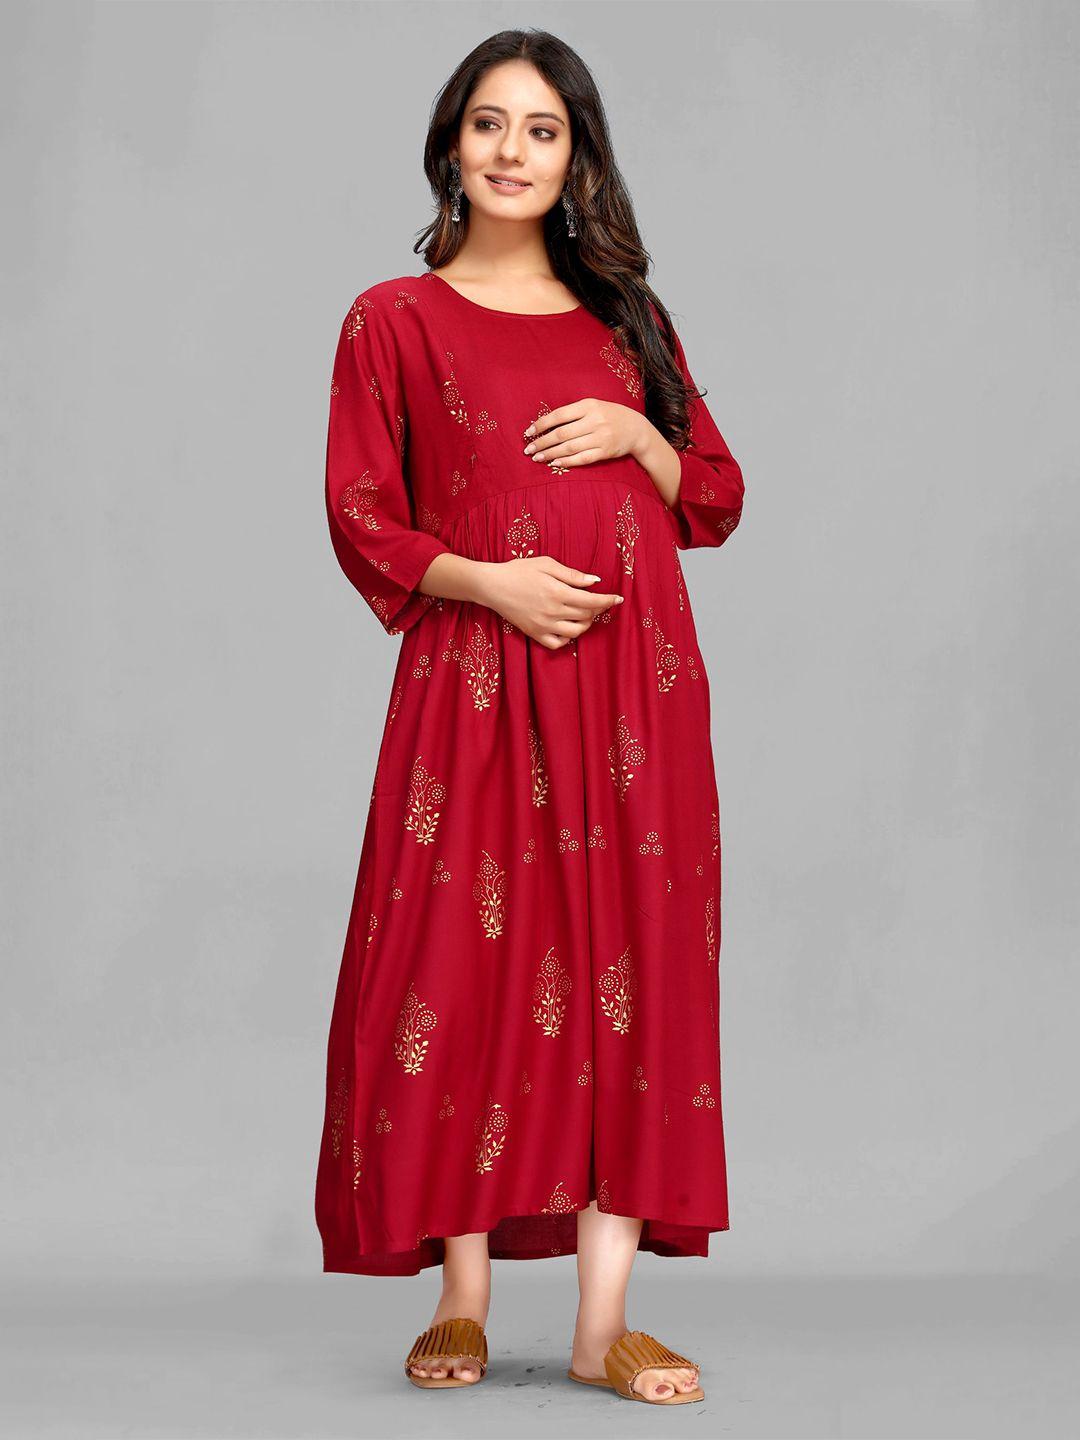 maiyee floral printed round neck maternity cotton fit & flare maxi ethnic dress